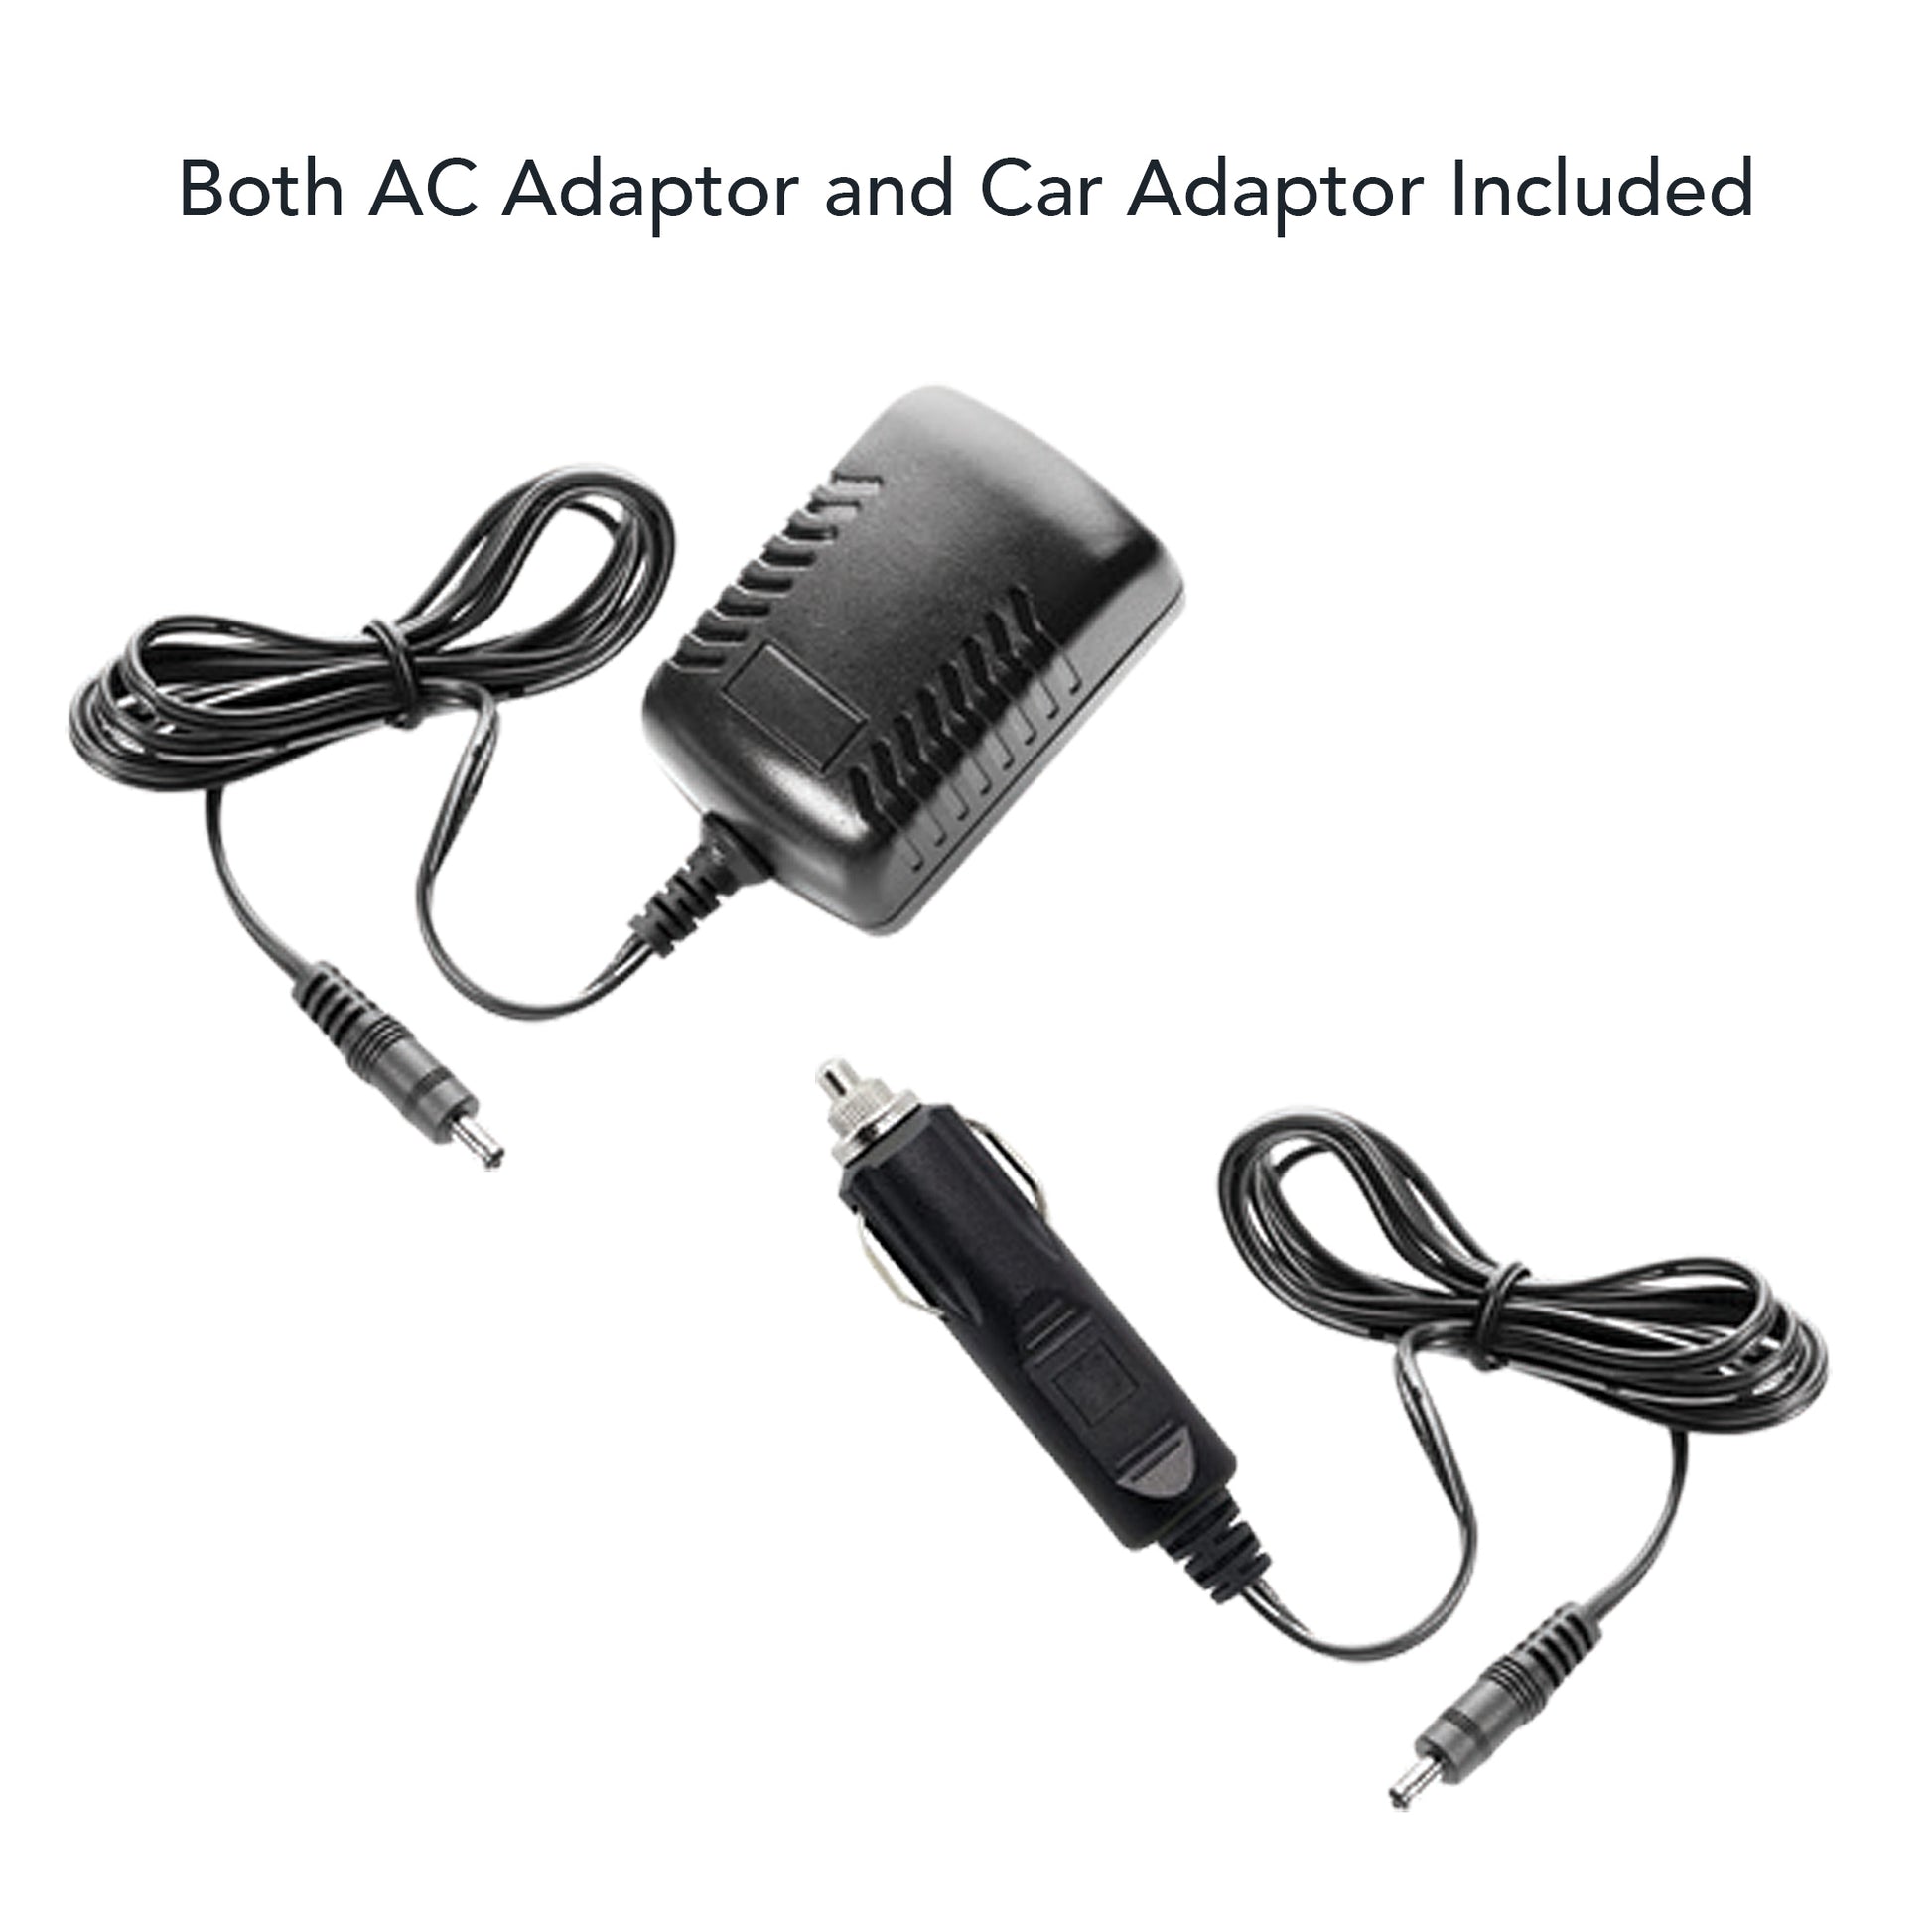 Both TAO ac adapter and car adapter are included for convenient use of the Spa Sciences shiatsu massager.